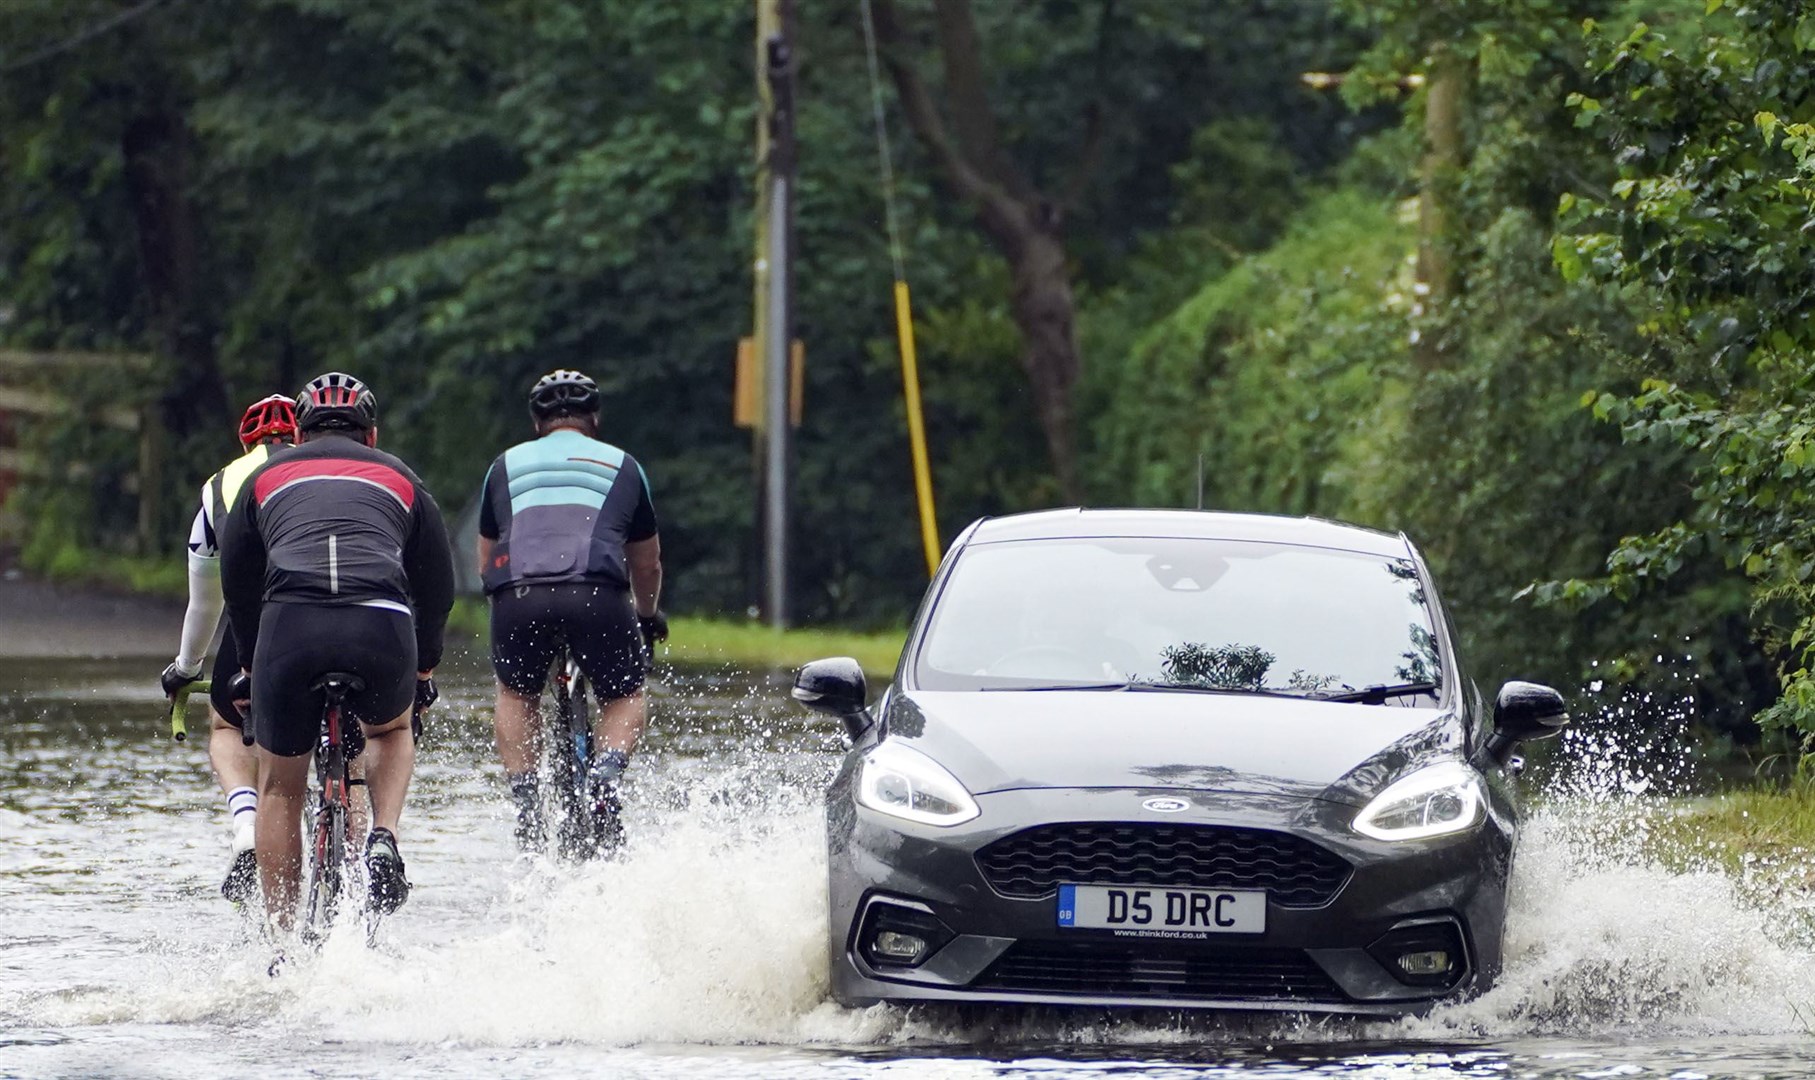 A car and cyclists pass on a flooded road near Swallowfield, Berkshire (Steve Parsons/PA)